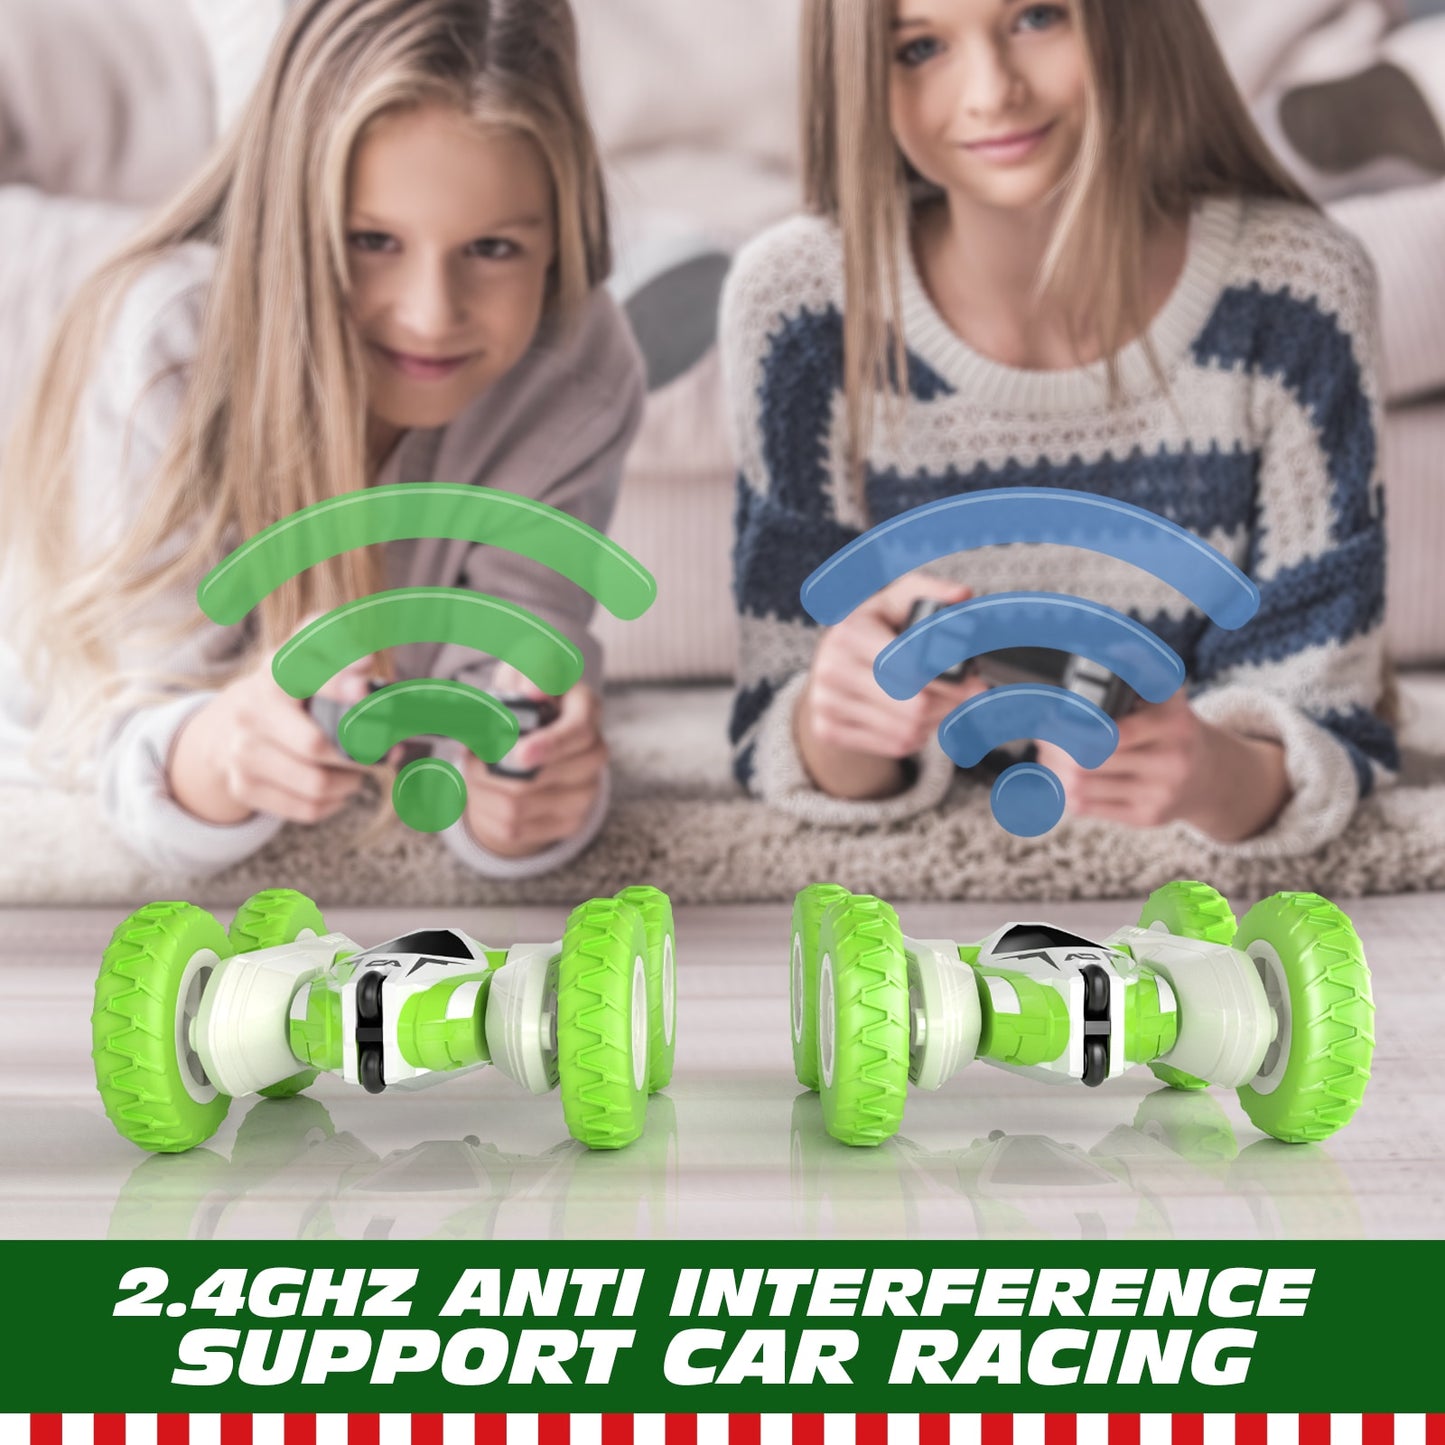 Sinovan Mini Stunt RC Car Toy: 2.4GHz Remote Control Double Sided Flips, 360° Rotating Vehicle – Exciting Gift for Kids